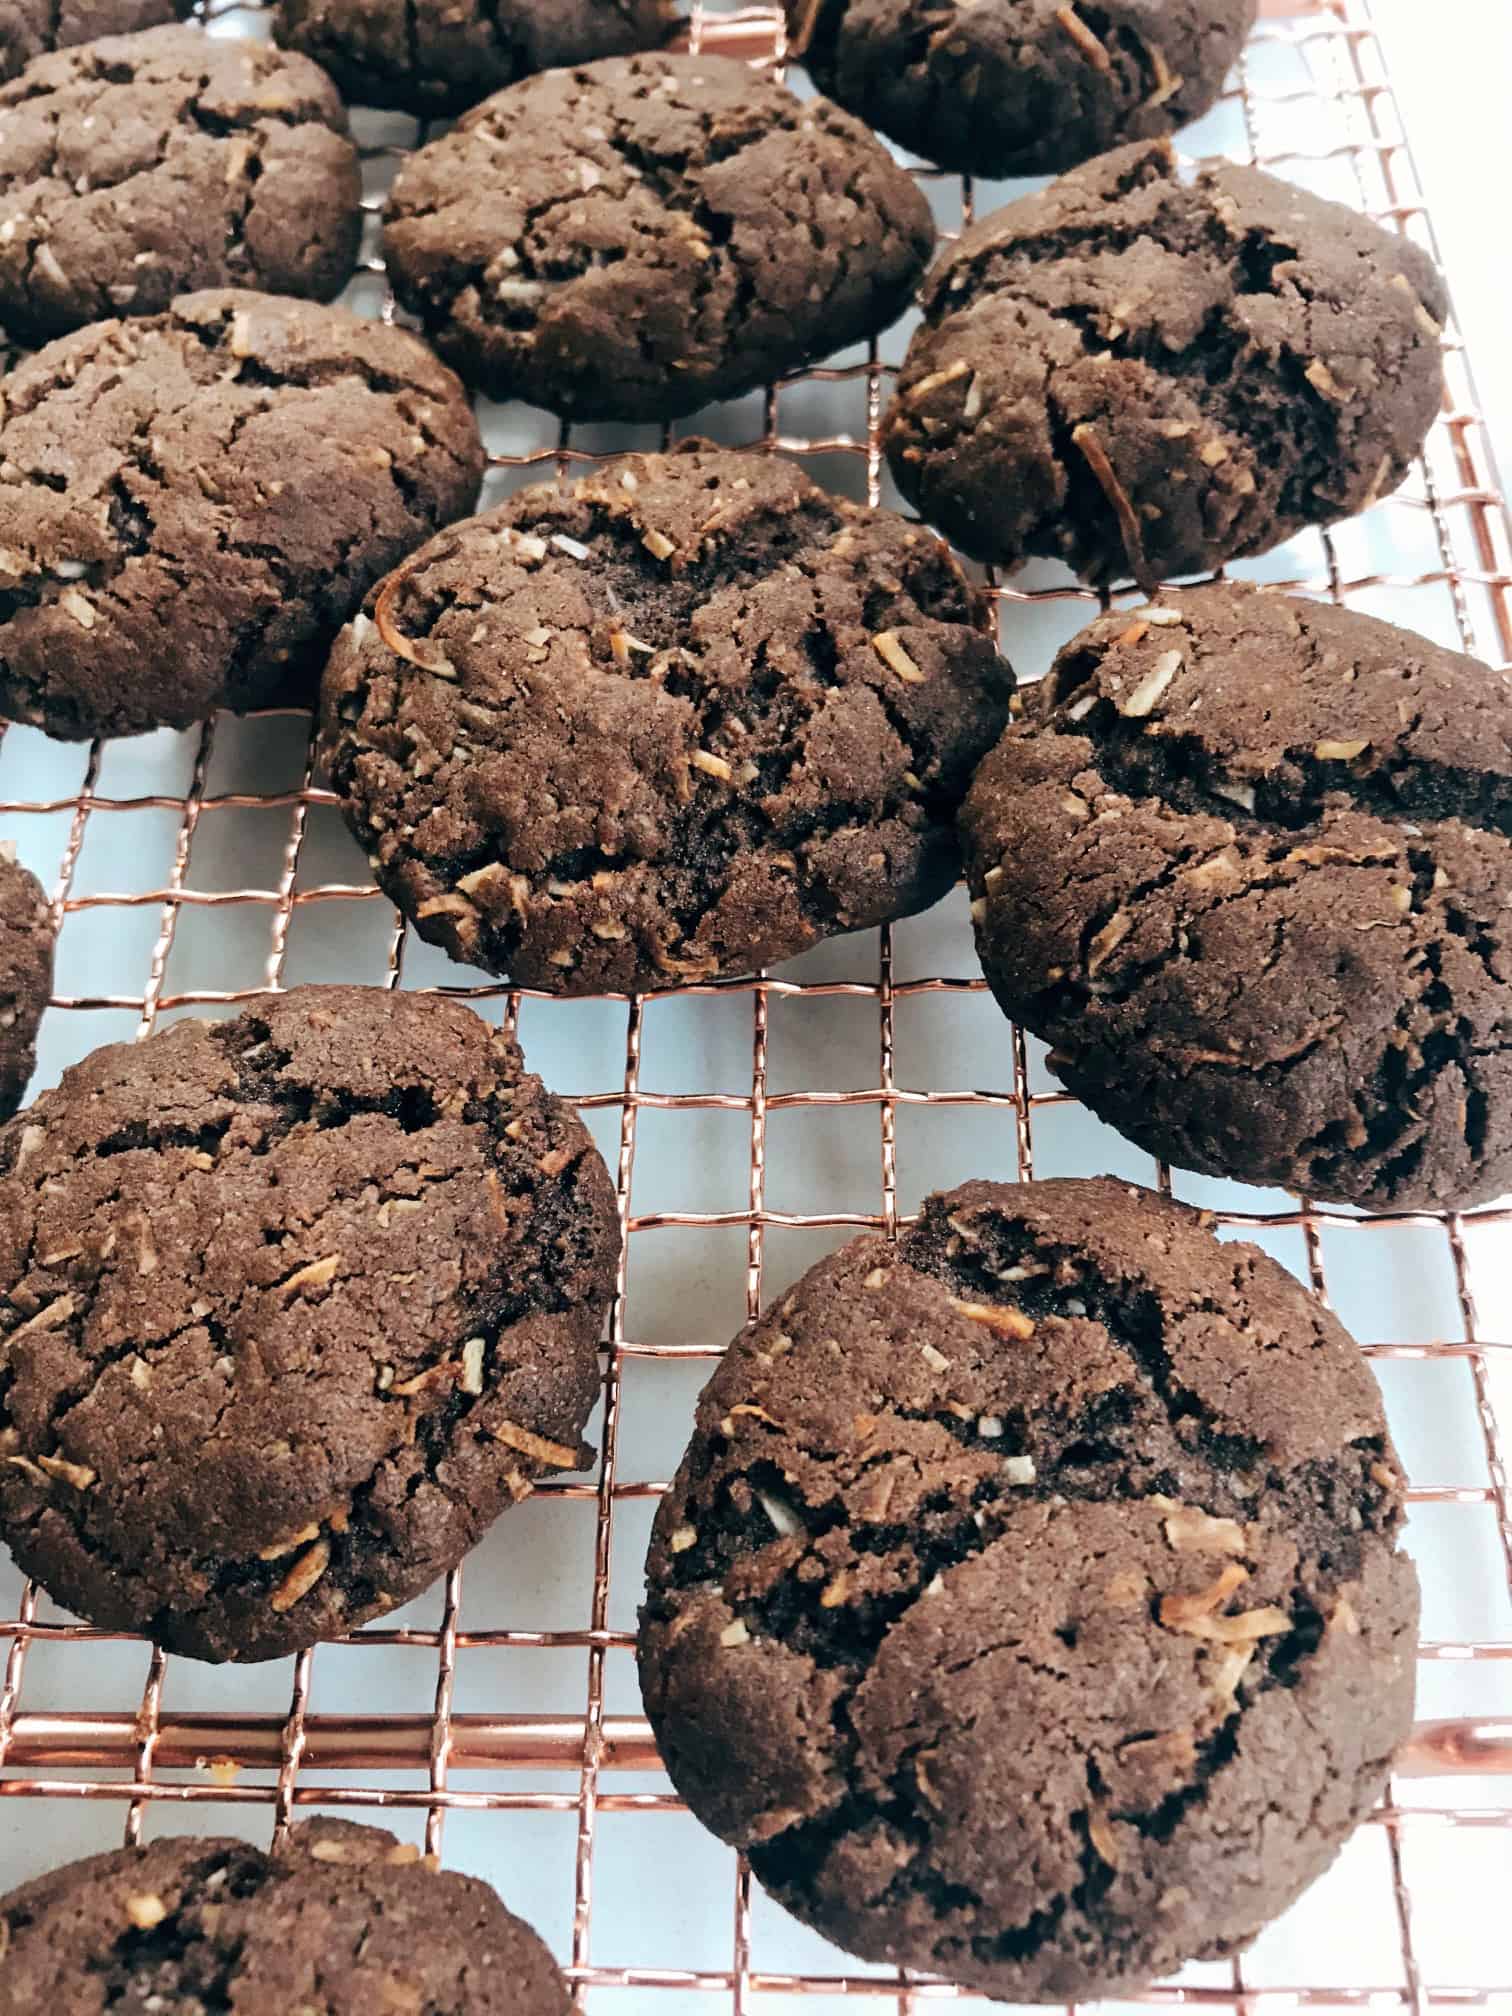 Quick chocolate biscuits that are actually pretty nutritious